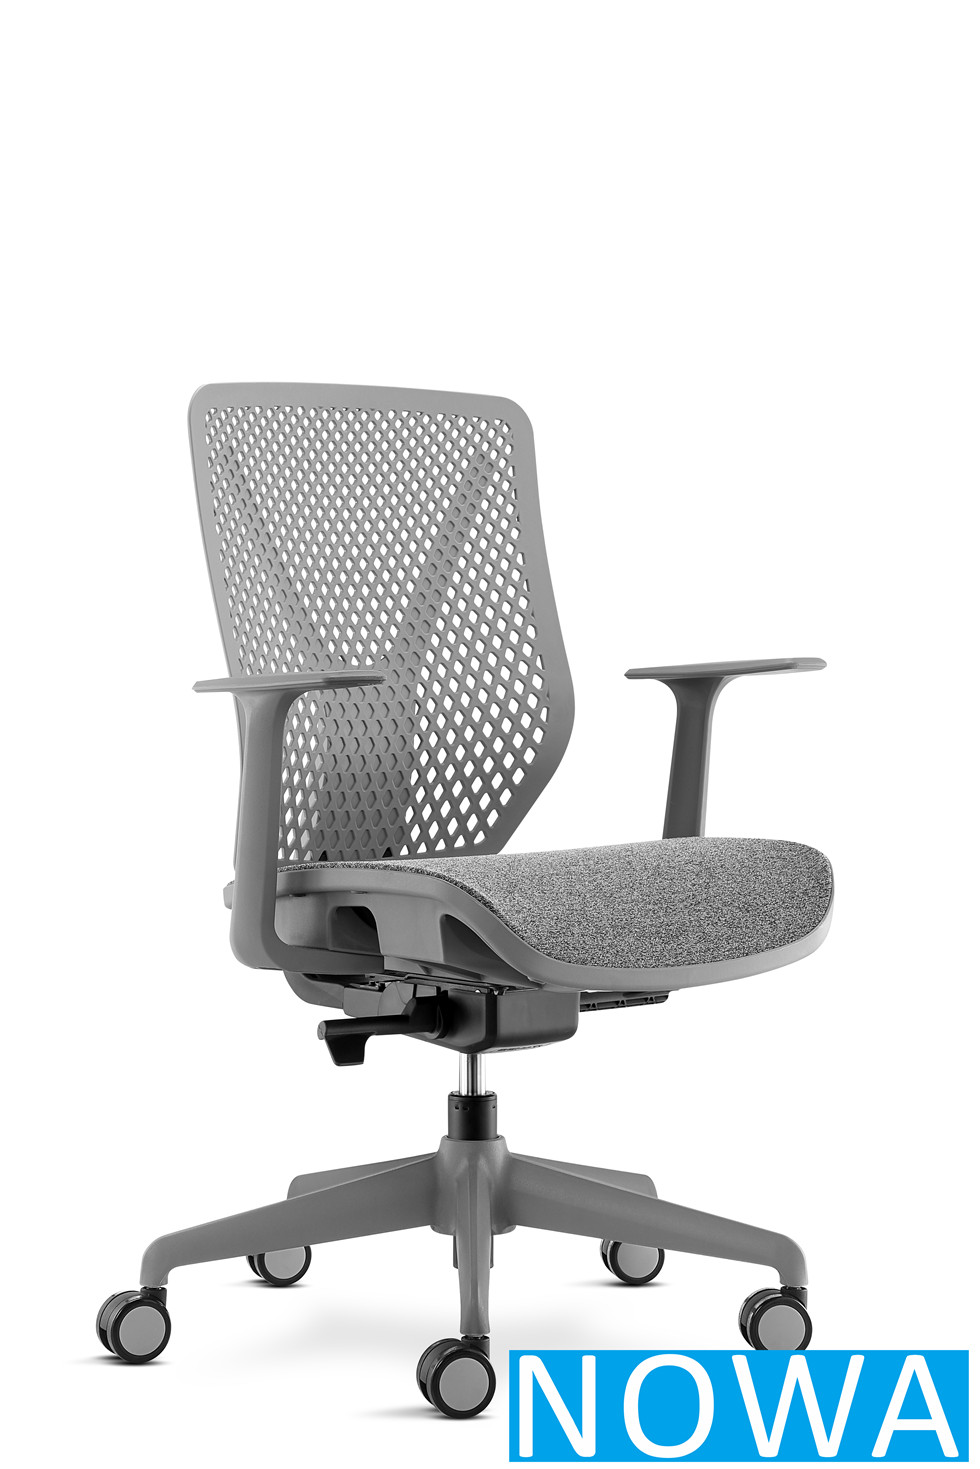 buy the office chair with mesh seat from Guangzhou factory,China supplier-NOWA-China Office Furniture, China Custom Made Furniture,